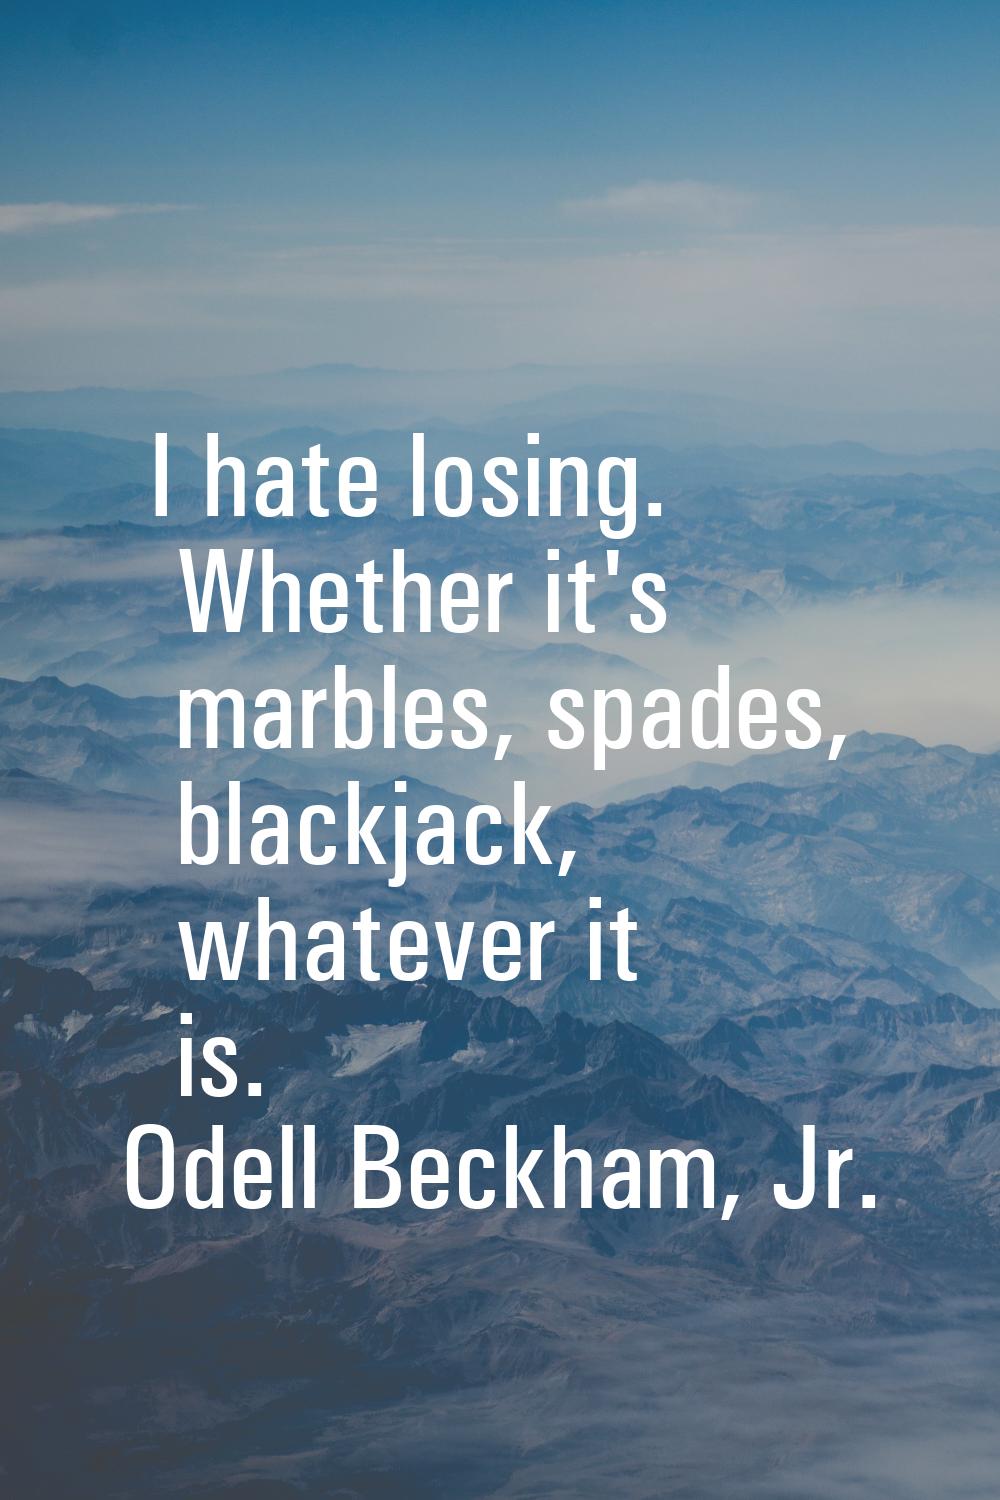 I hate losing. Whether it's marbles, spades, blackjack, whatever it is.